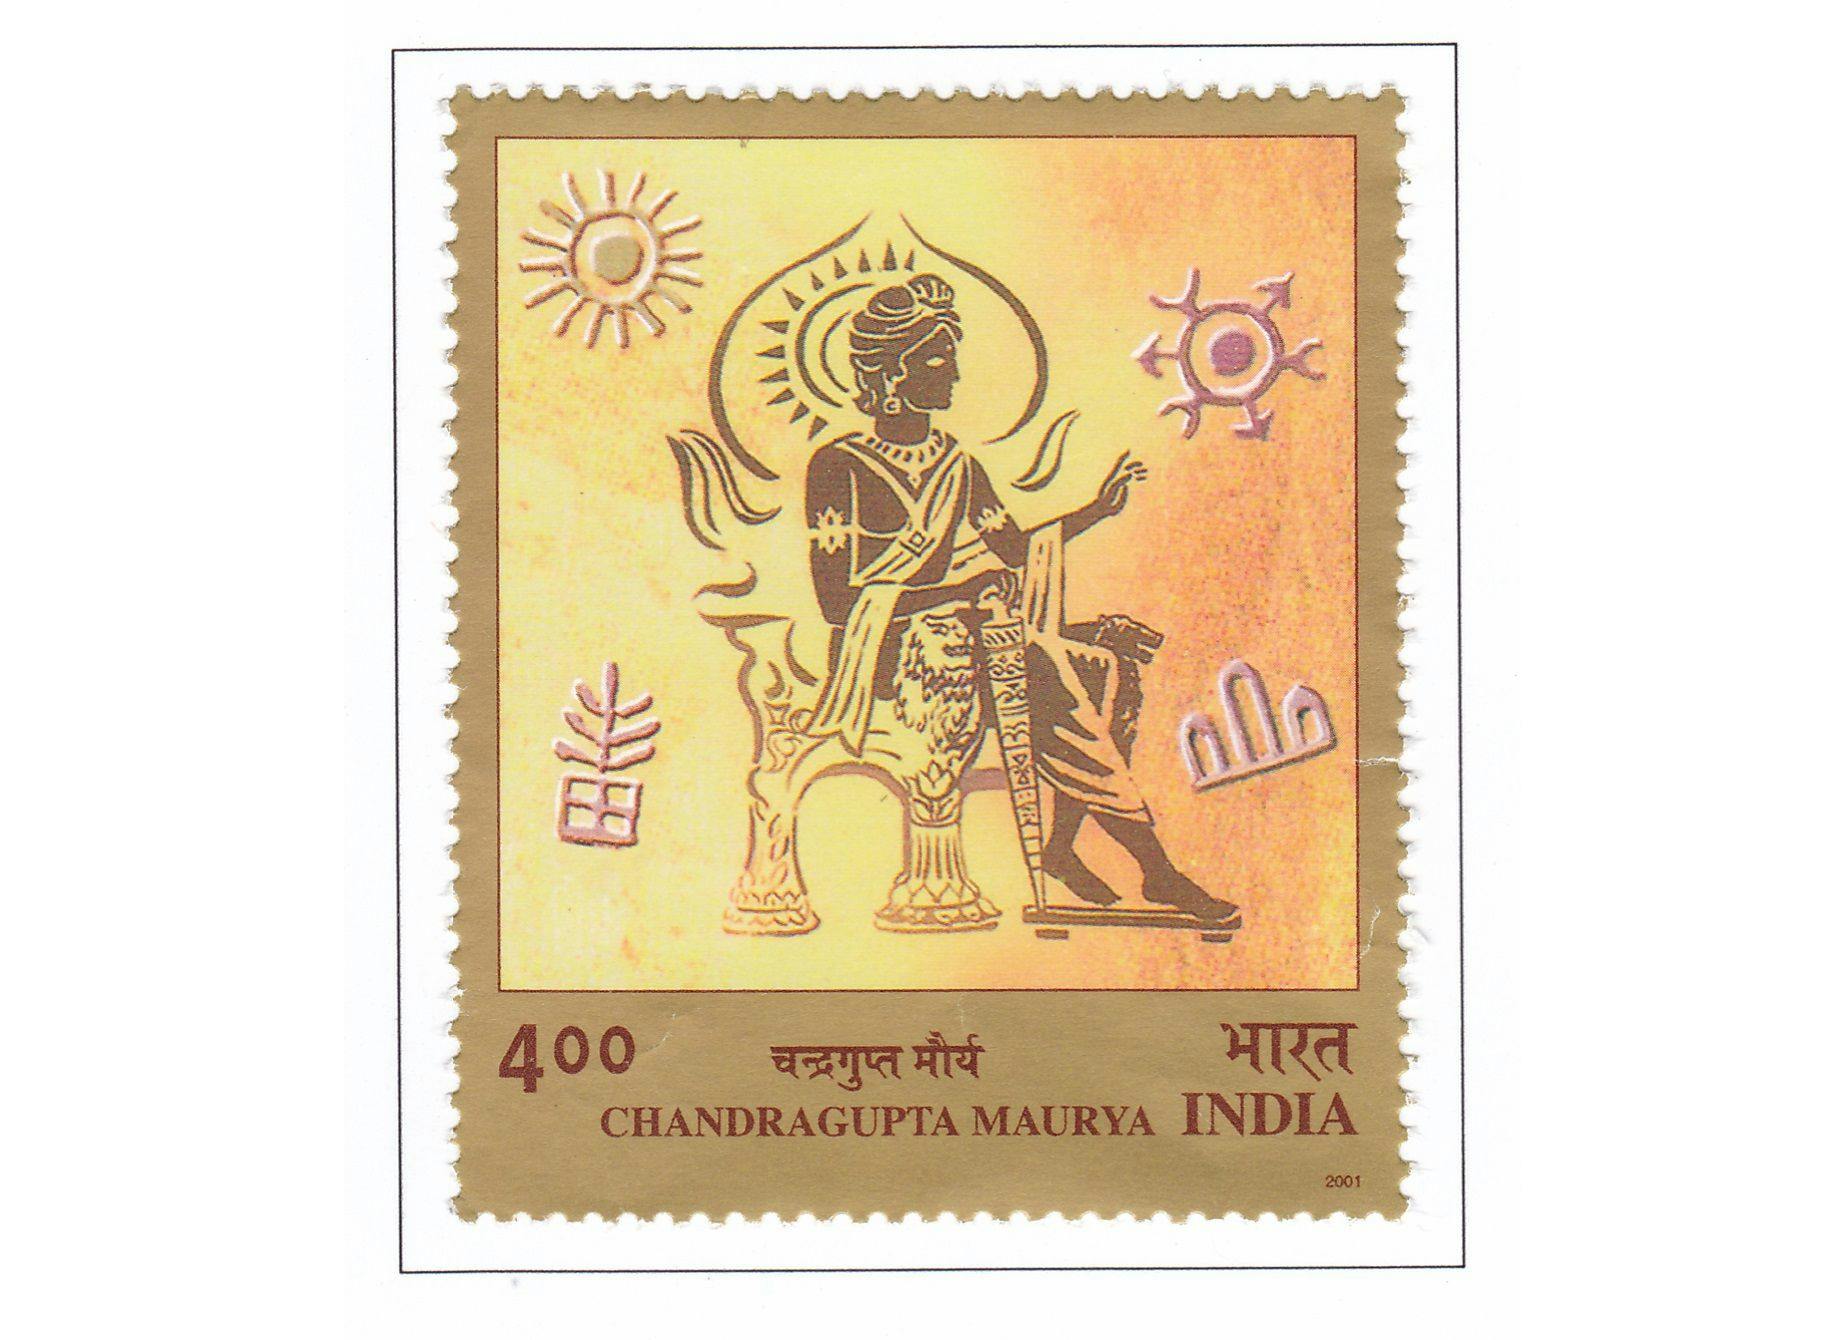 Postage stamp issued in honour of Chandragupta Maurya in 2001